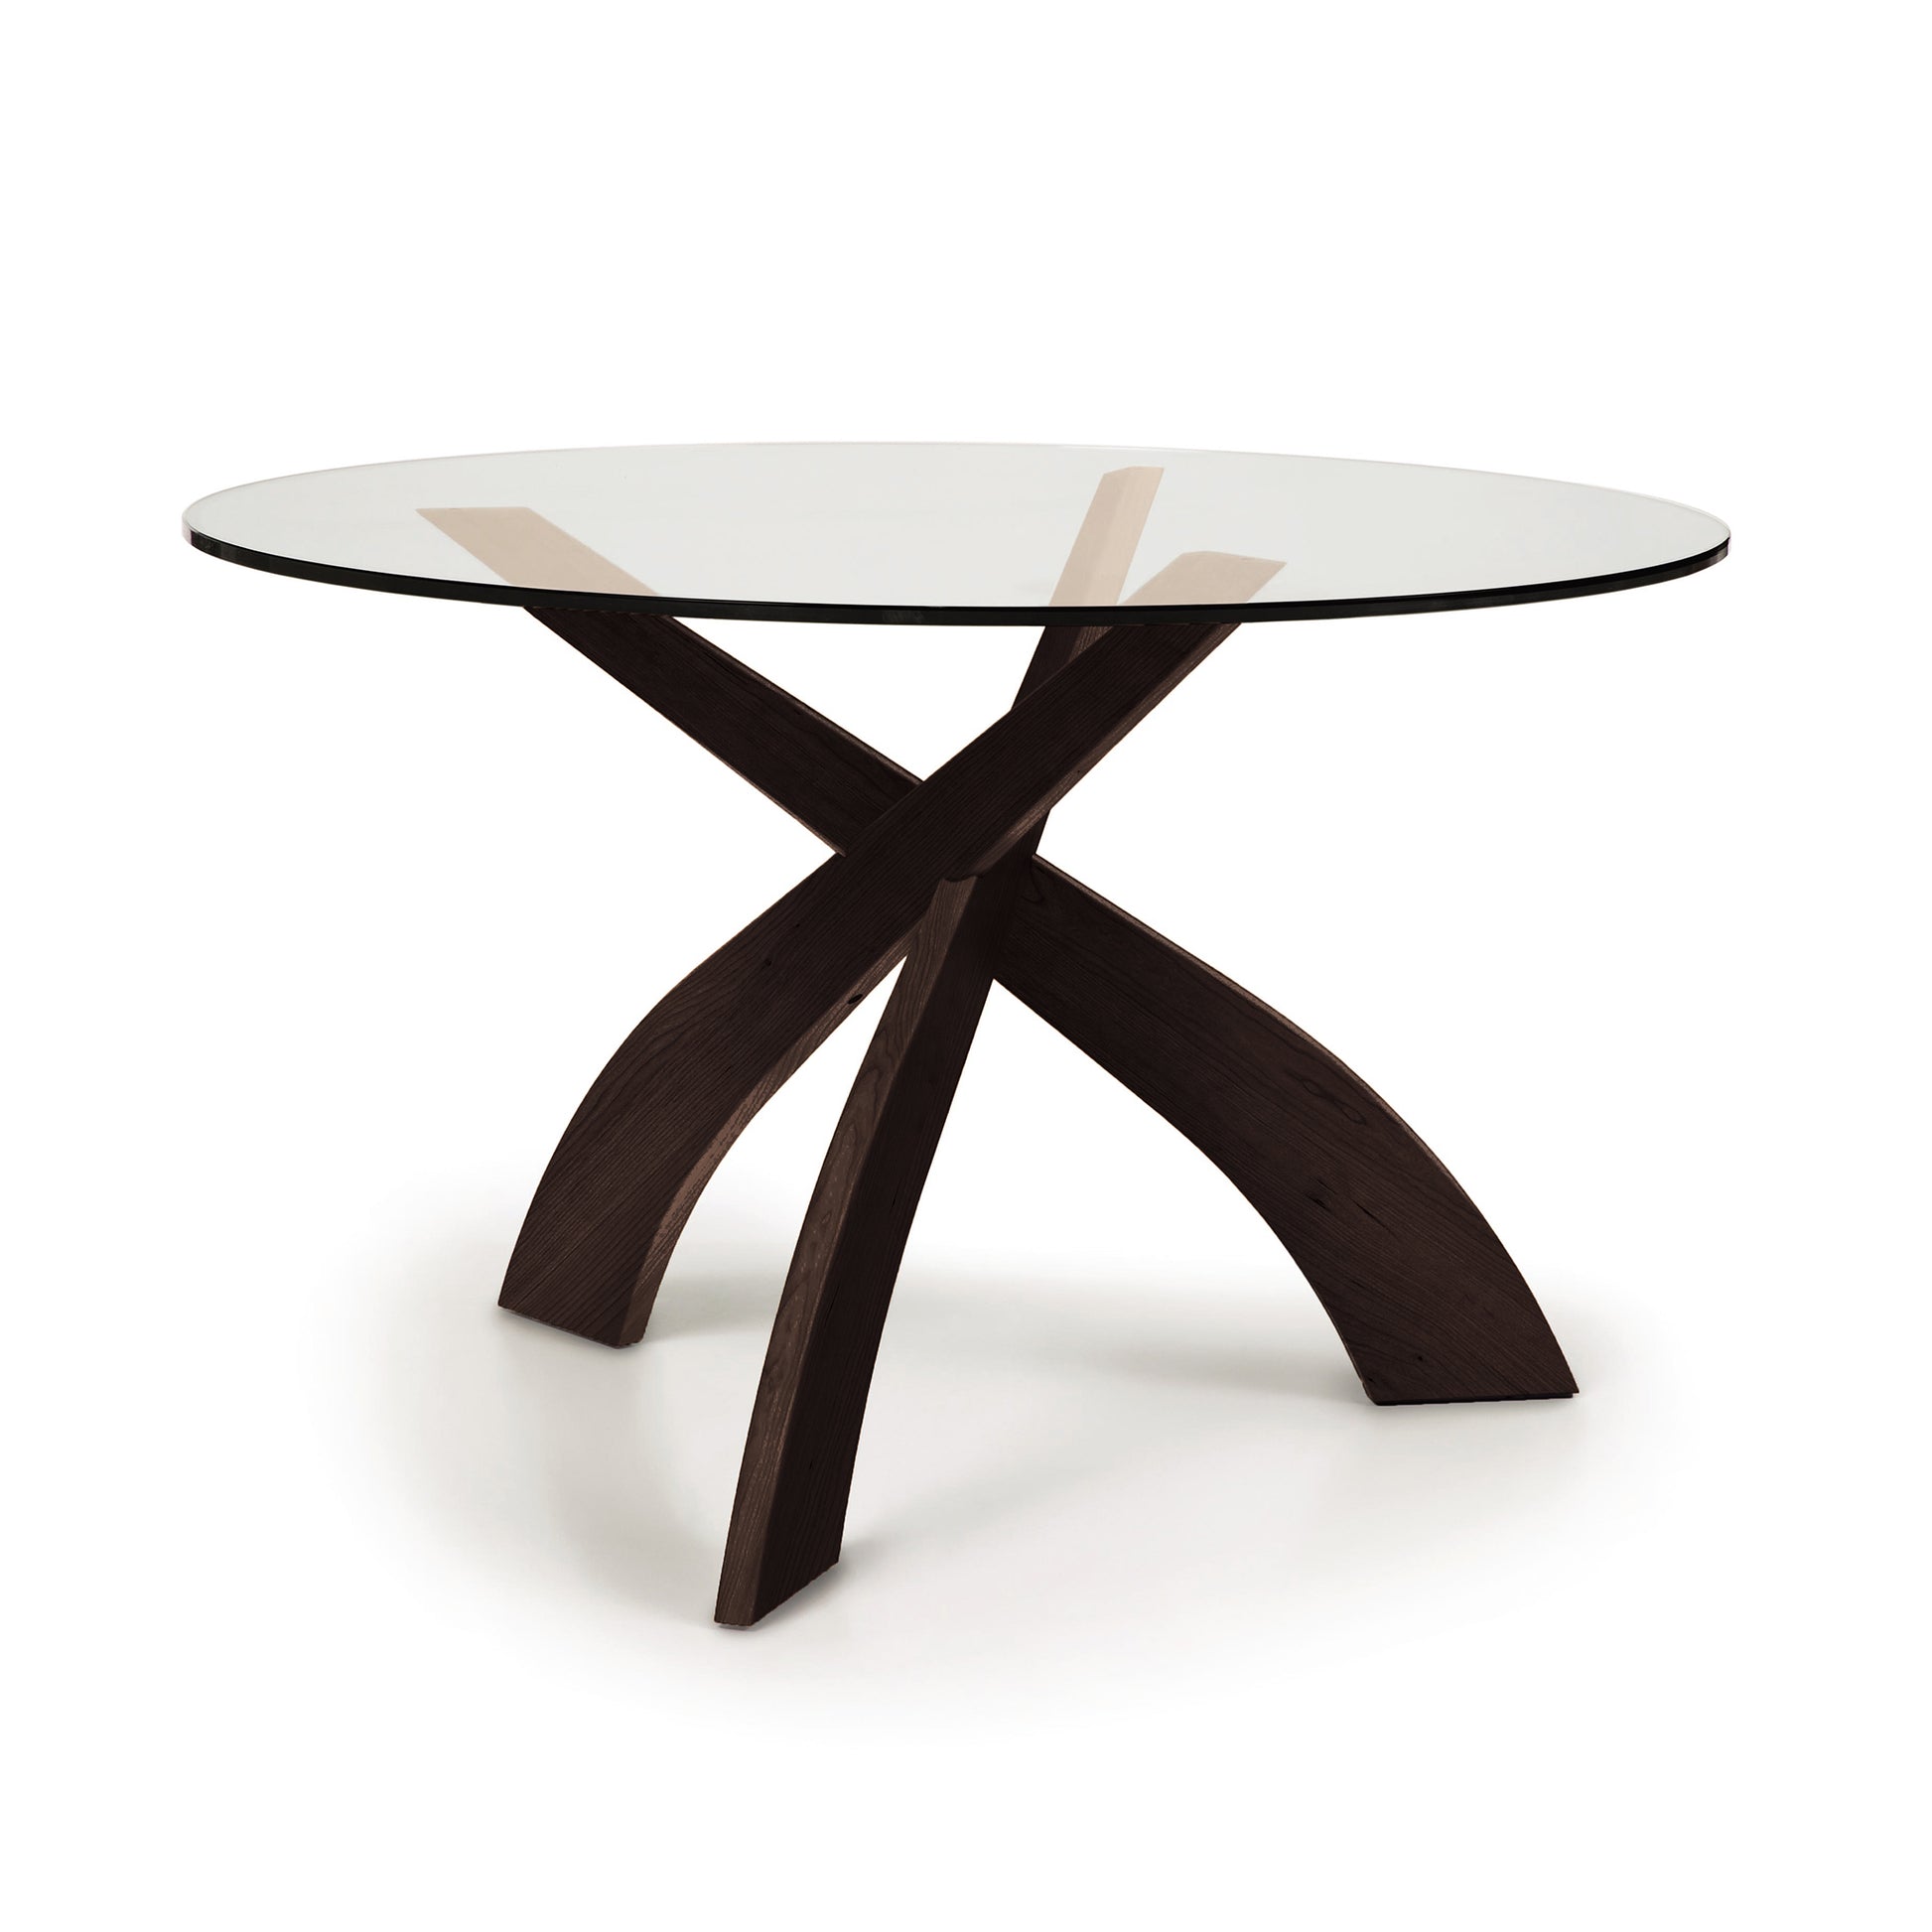 A modern Entwine Round Glass Top Dining Table with a tempered glass top and a dark wooden base that features an x-shaped design by Copeland Furniture.